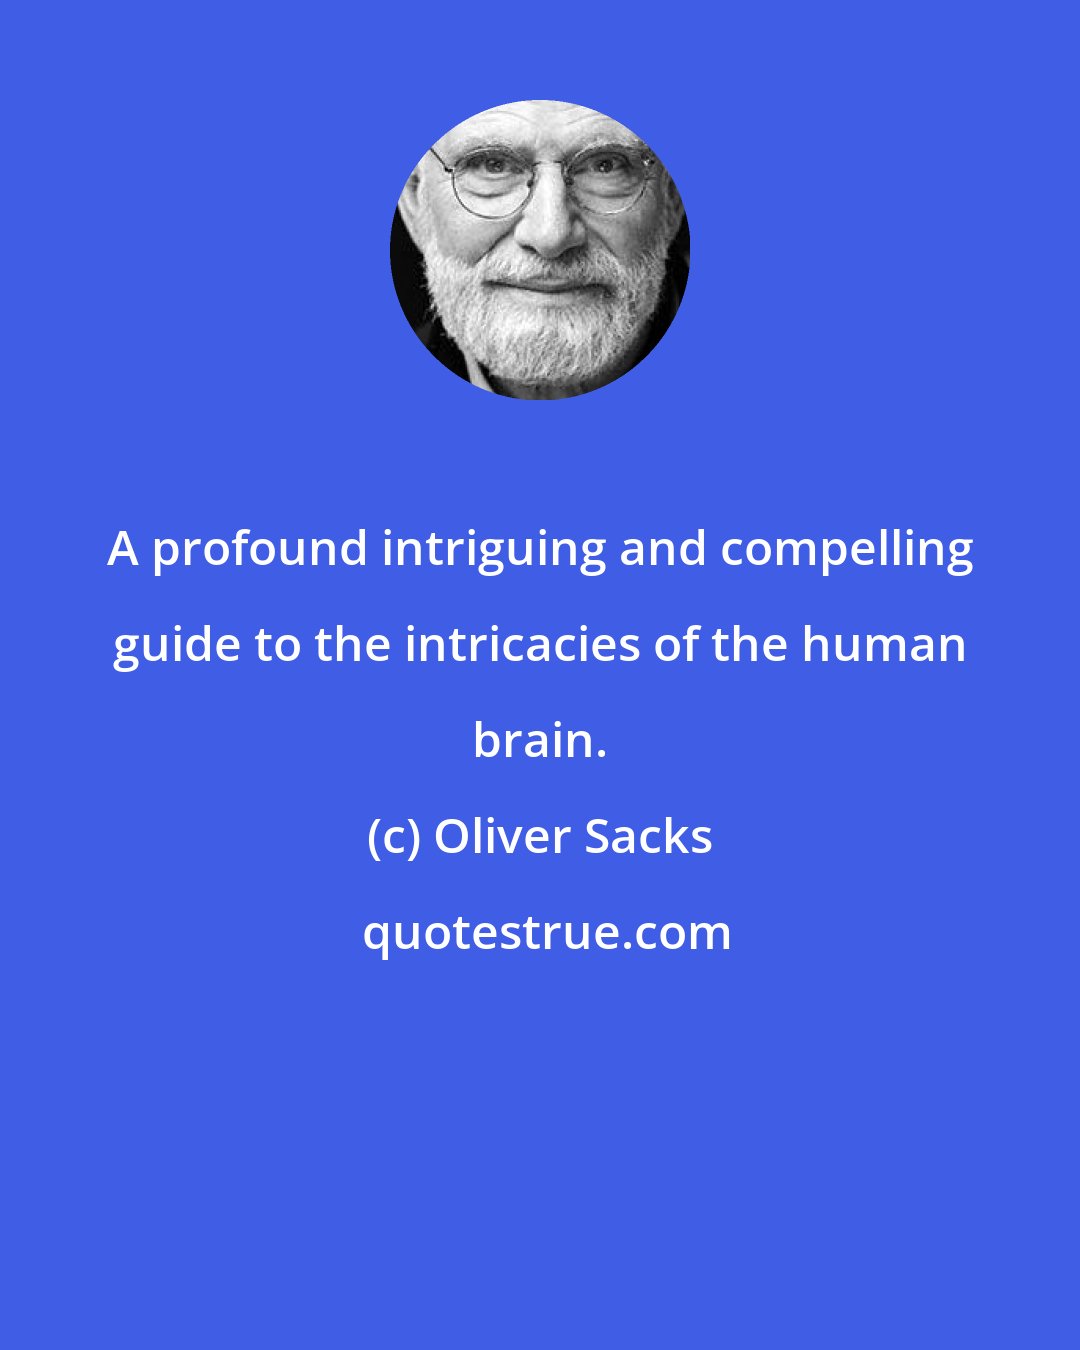 Oliver Sacks: A profound intriguing and compelling guide to the intricacies of the human brain.